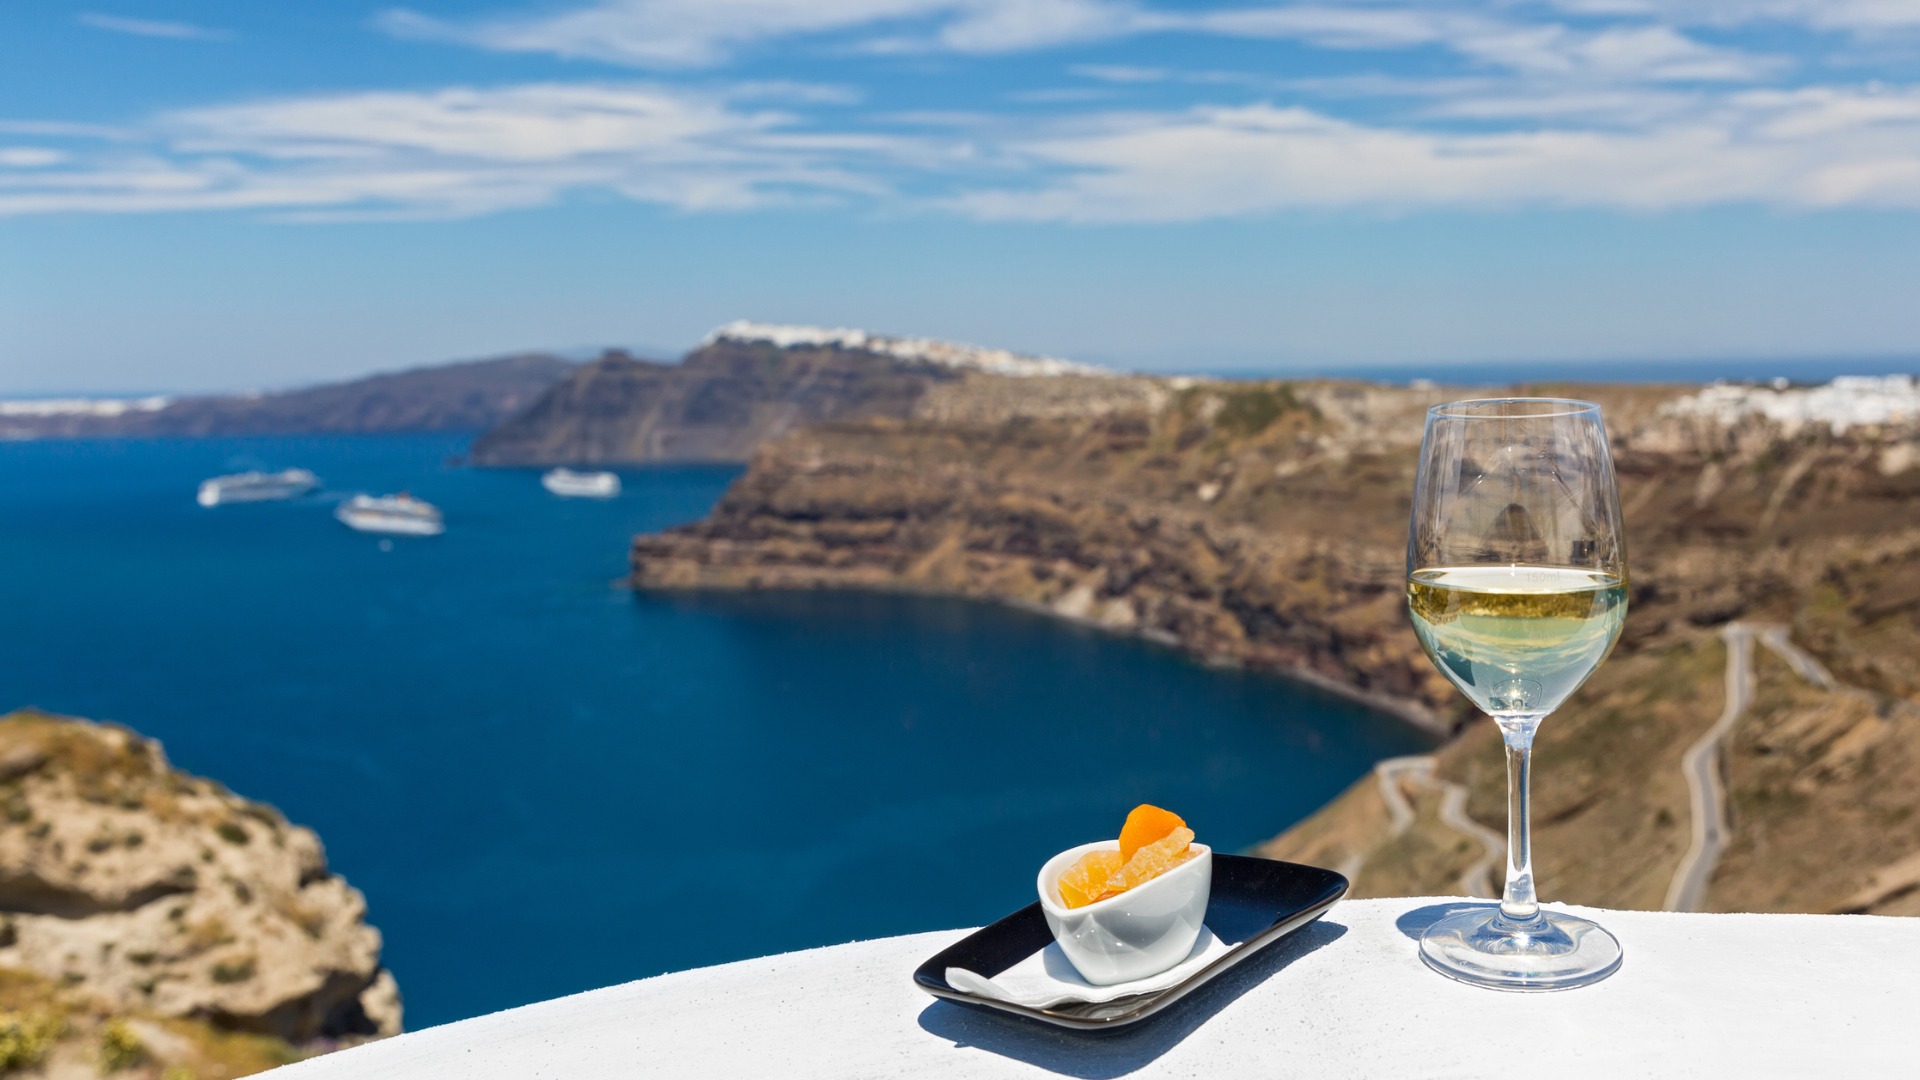 This image shows a glass of white wine in the foreground with the caldera of Santorini in the background. Santorini produces some of the best Greek wine. 